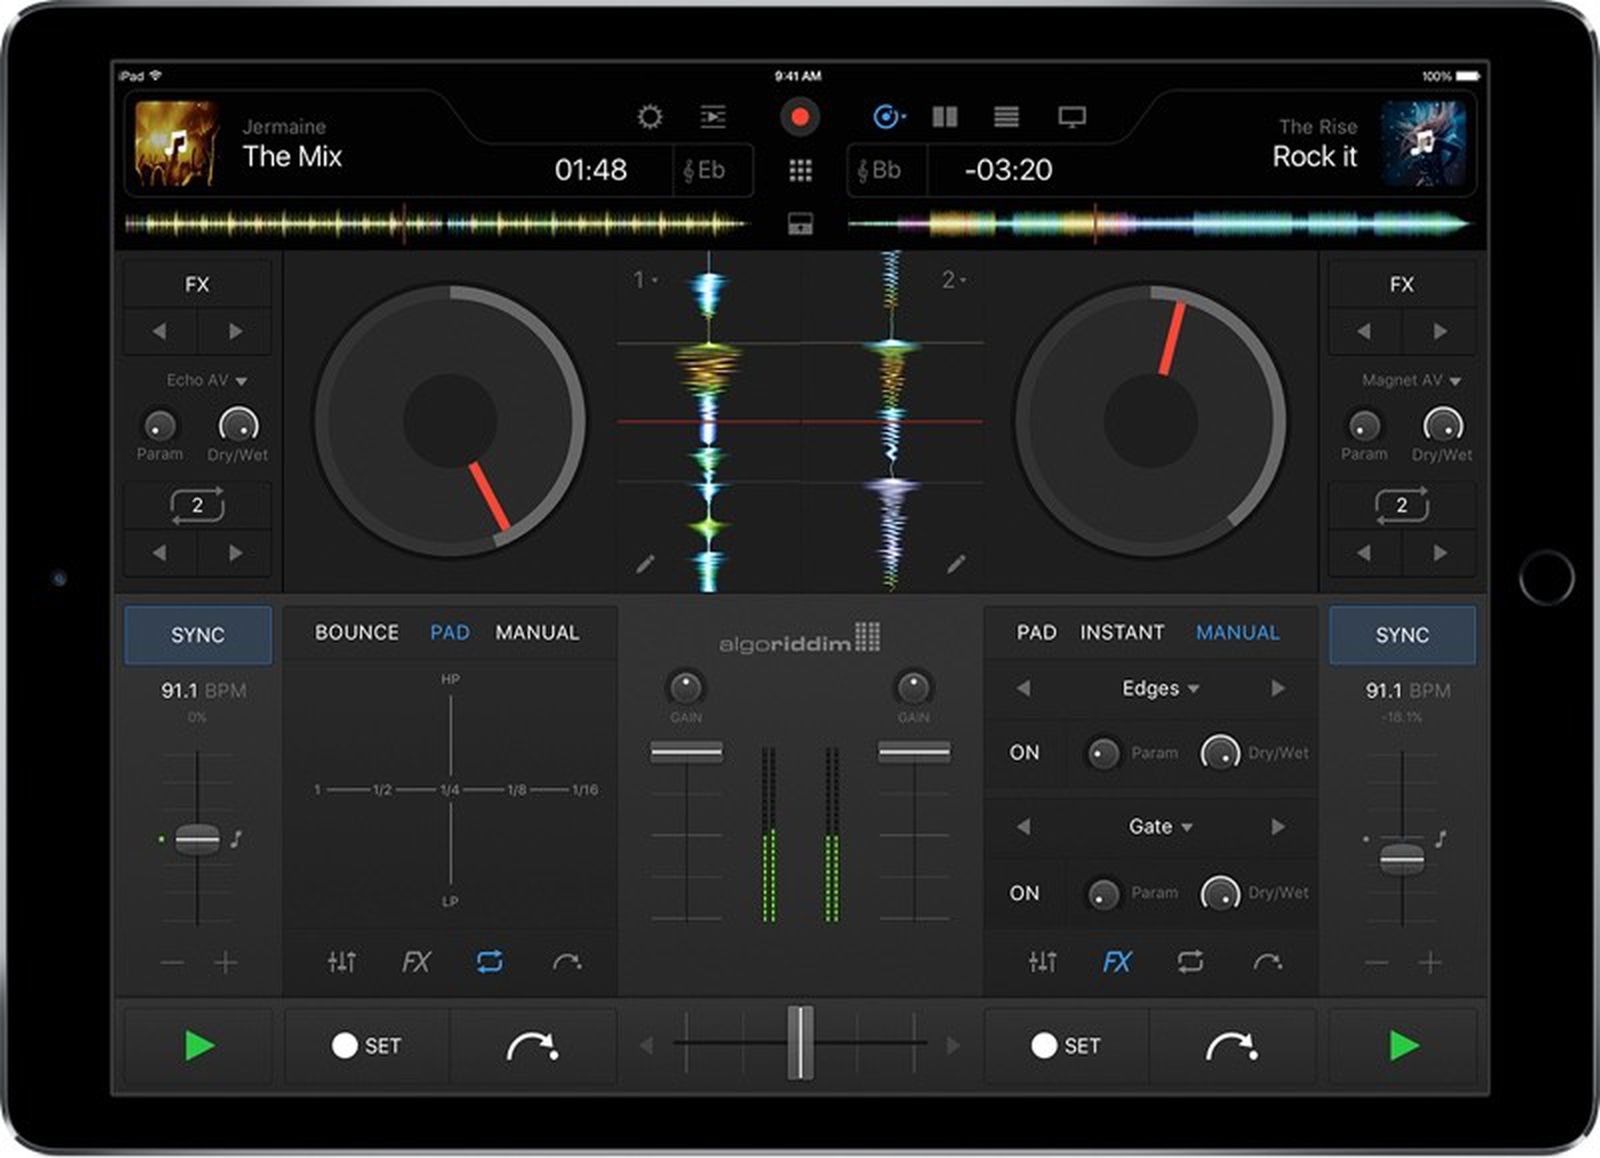 New 'djay Pro' App for iPad Brings Redesigned Interface, Powerful Mixing Tools, and More - MacRumors